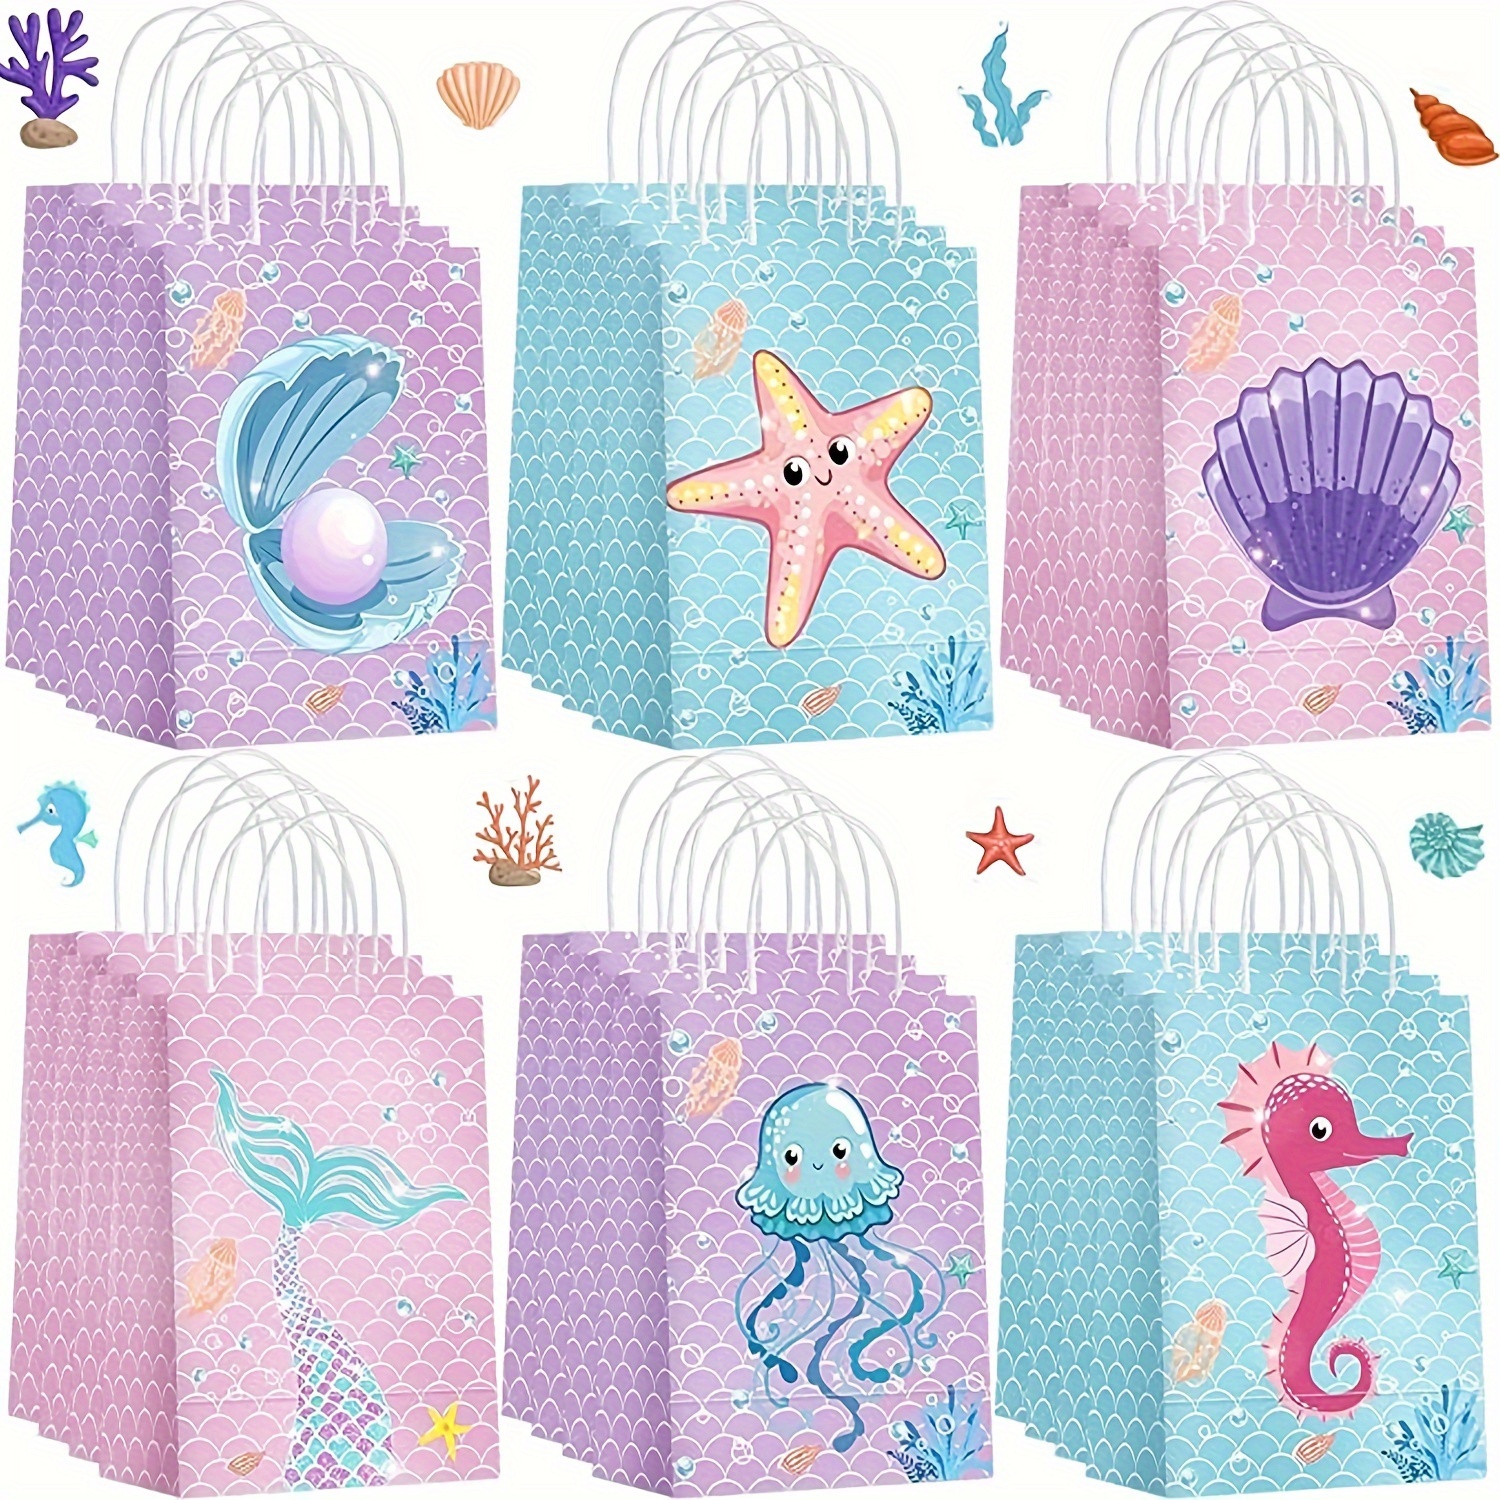 

magical Mermaid" 18-pack Mermaid Themed Party Favor Bags - Durable Kraft Paper Gift Bags With Gradient Scales Design For Birthdays, Weddings & Bridal Showers